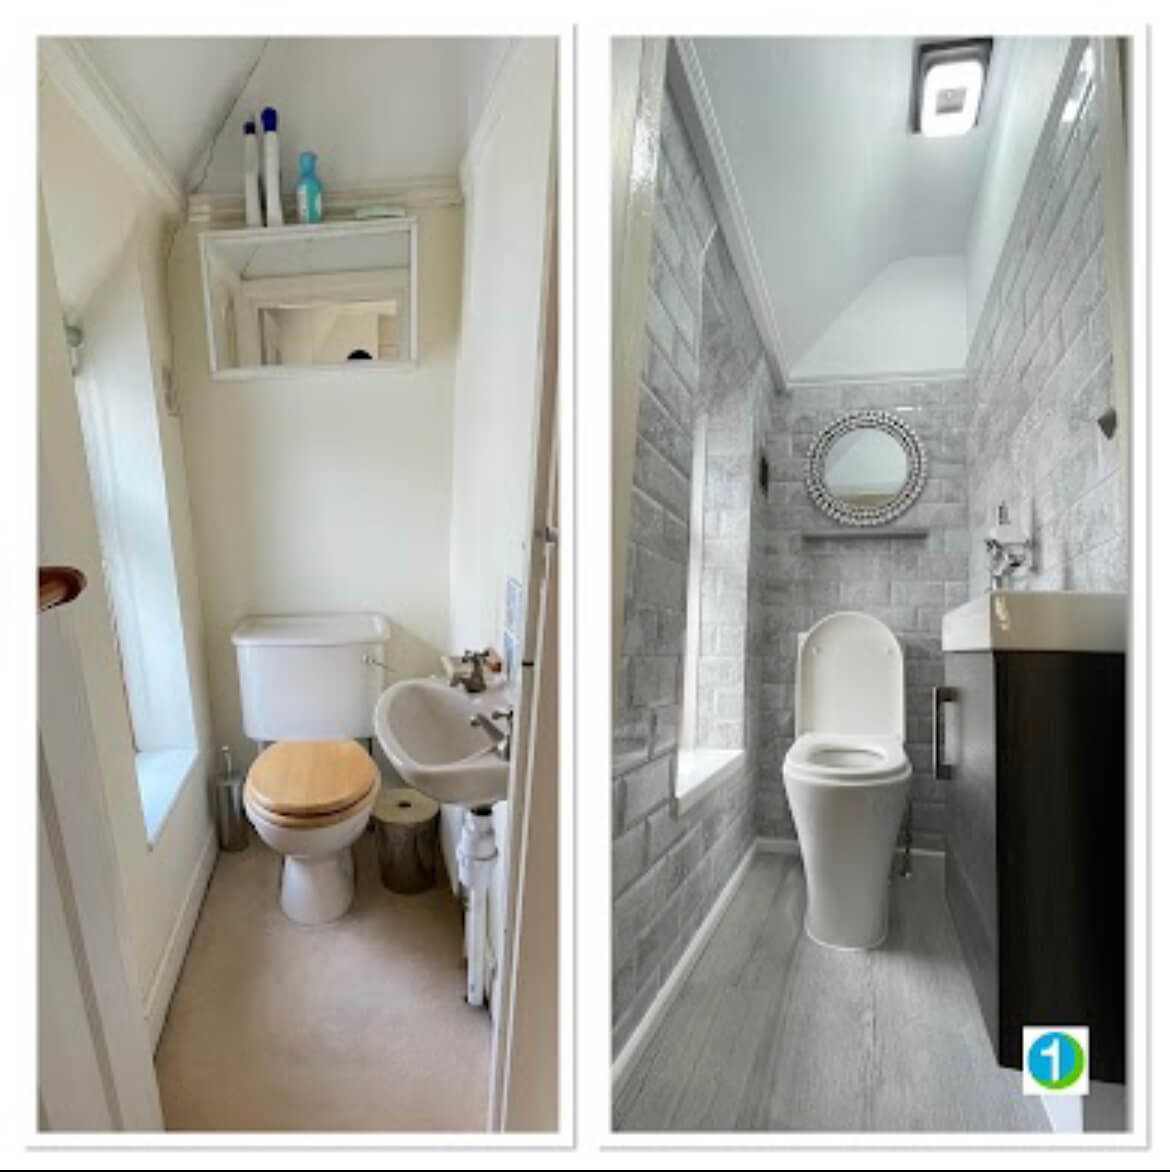 A before and after comparison of a bathroom redecorated by One Handyman